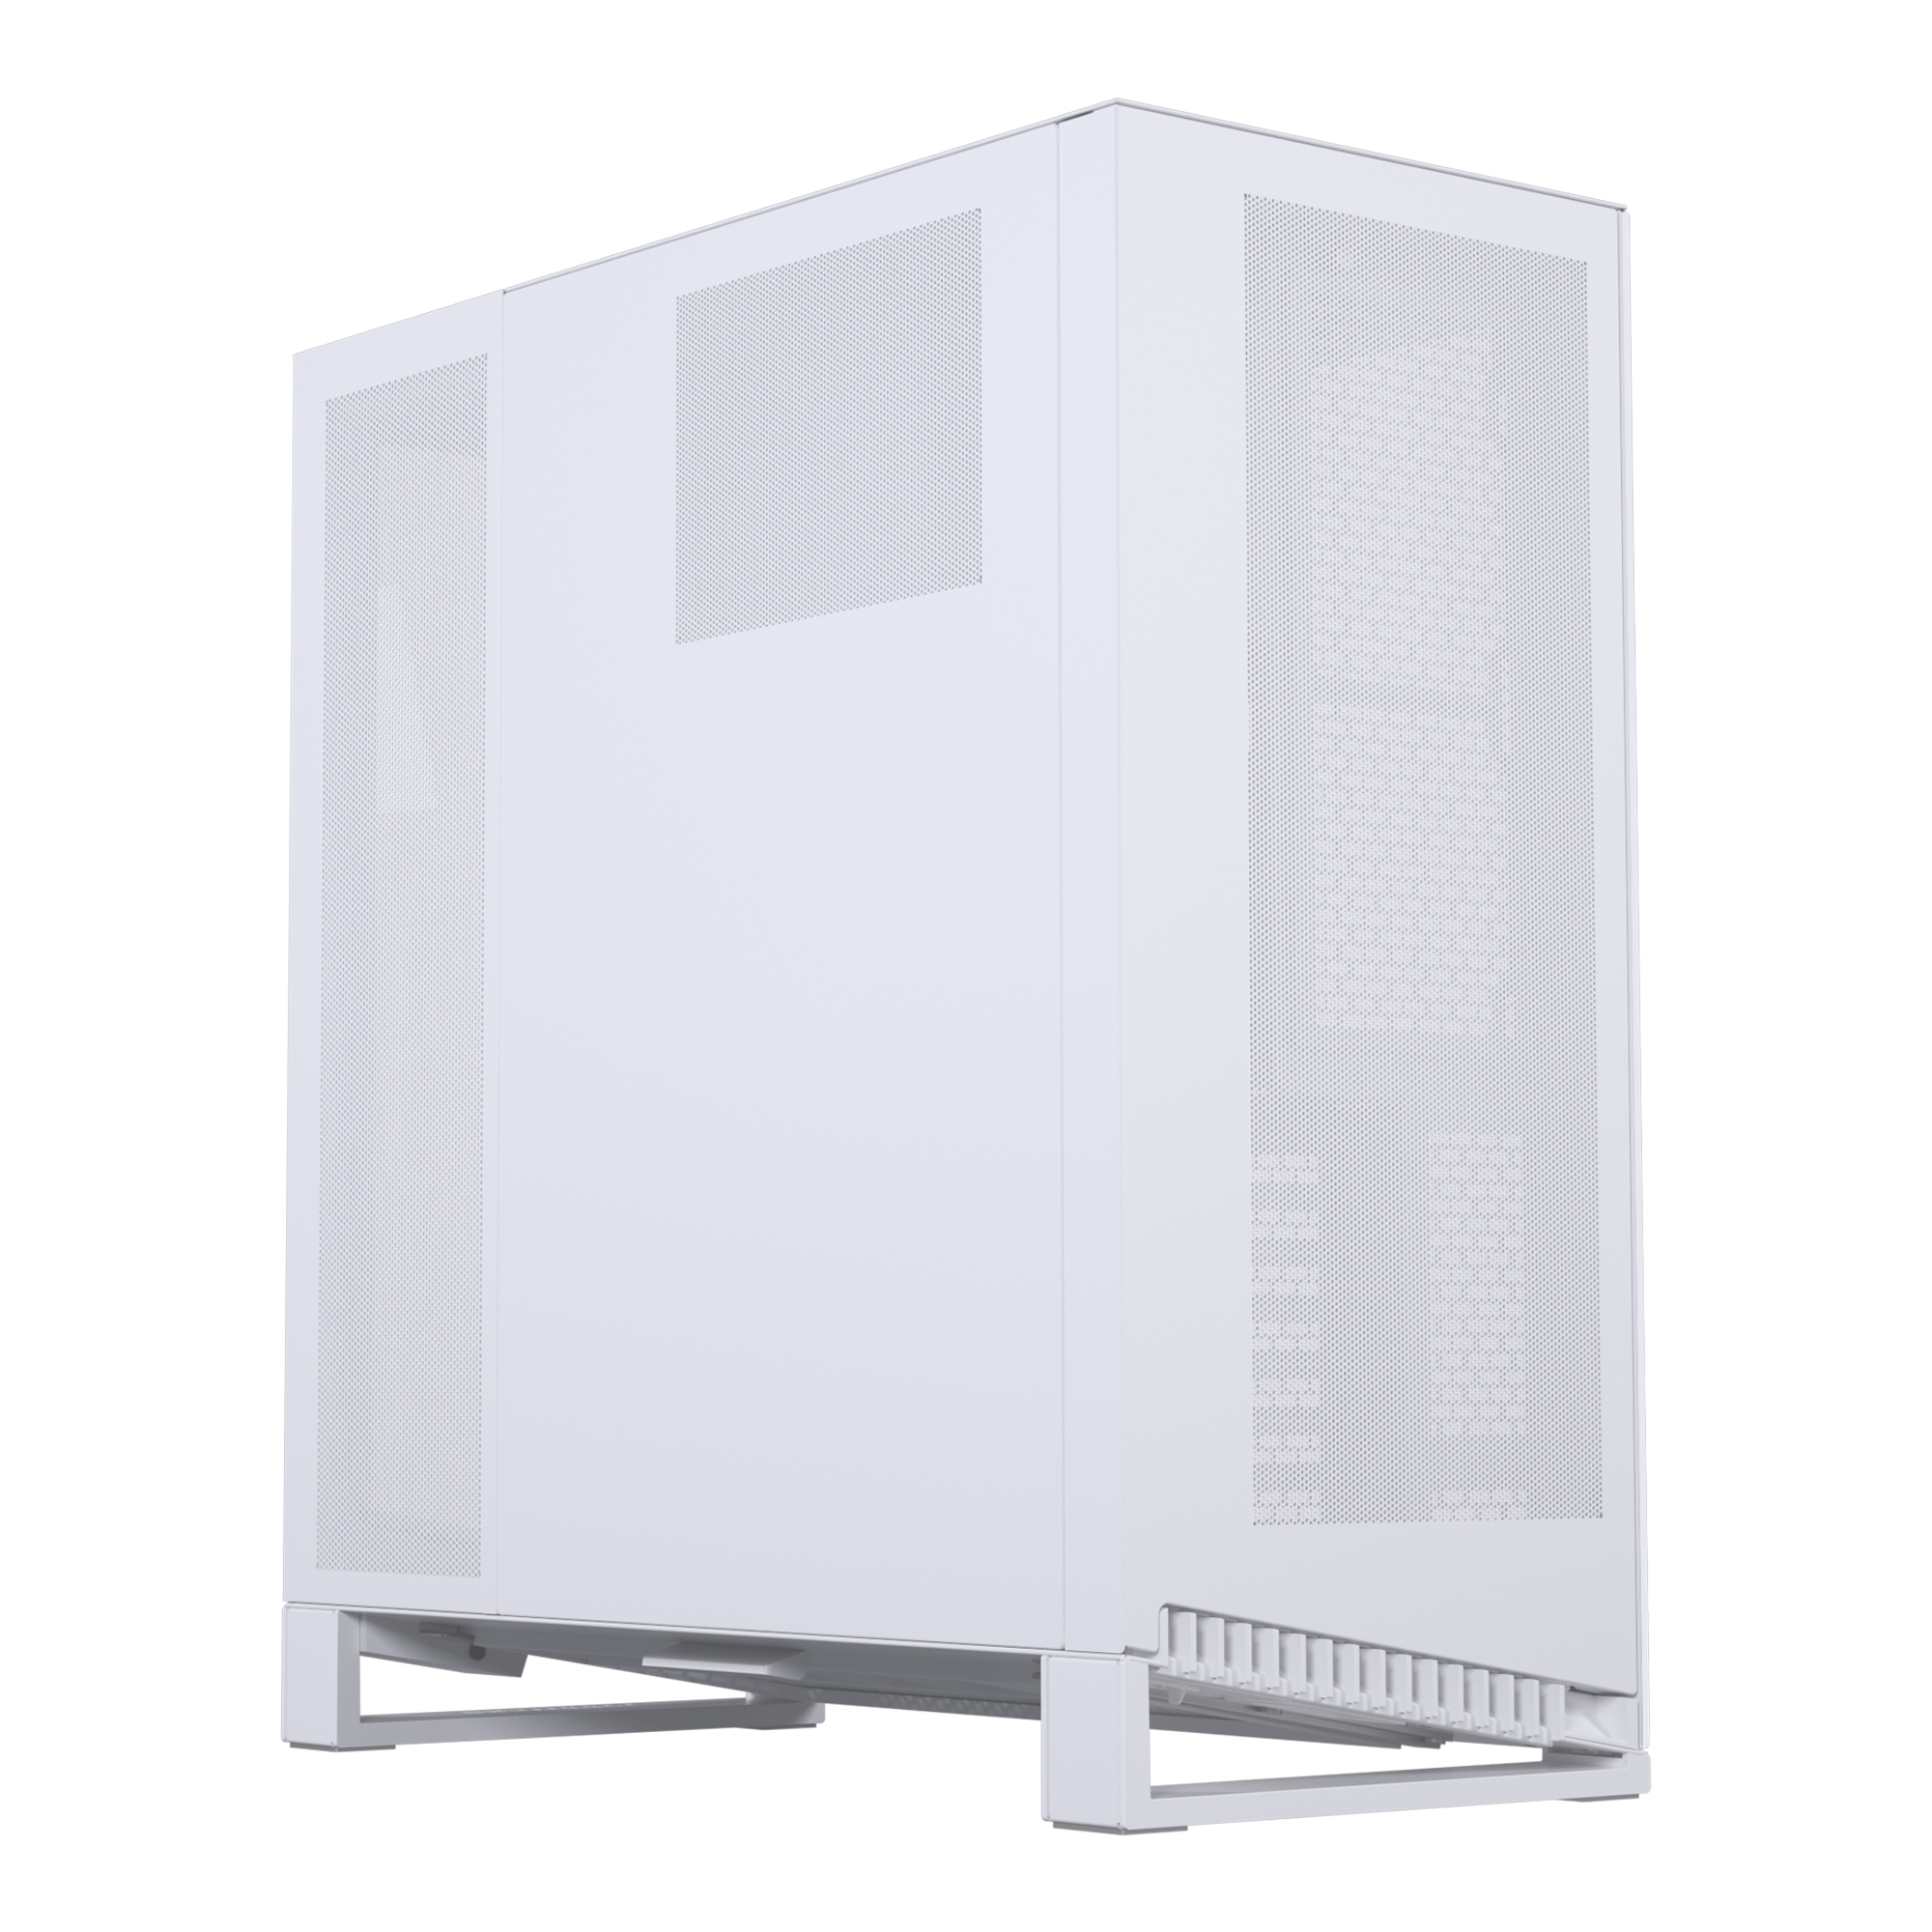 Phanteks (PH-NV723TG_DMW01) NV7 Showcase Full-Tower Chassis, High Airflow  Performance, Integrated D/A-RGB Lighting, Seamless Tempered Glass Design,  12